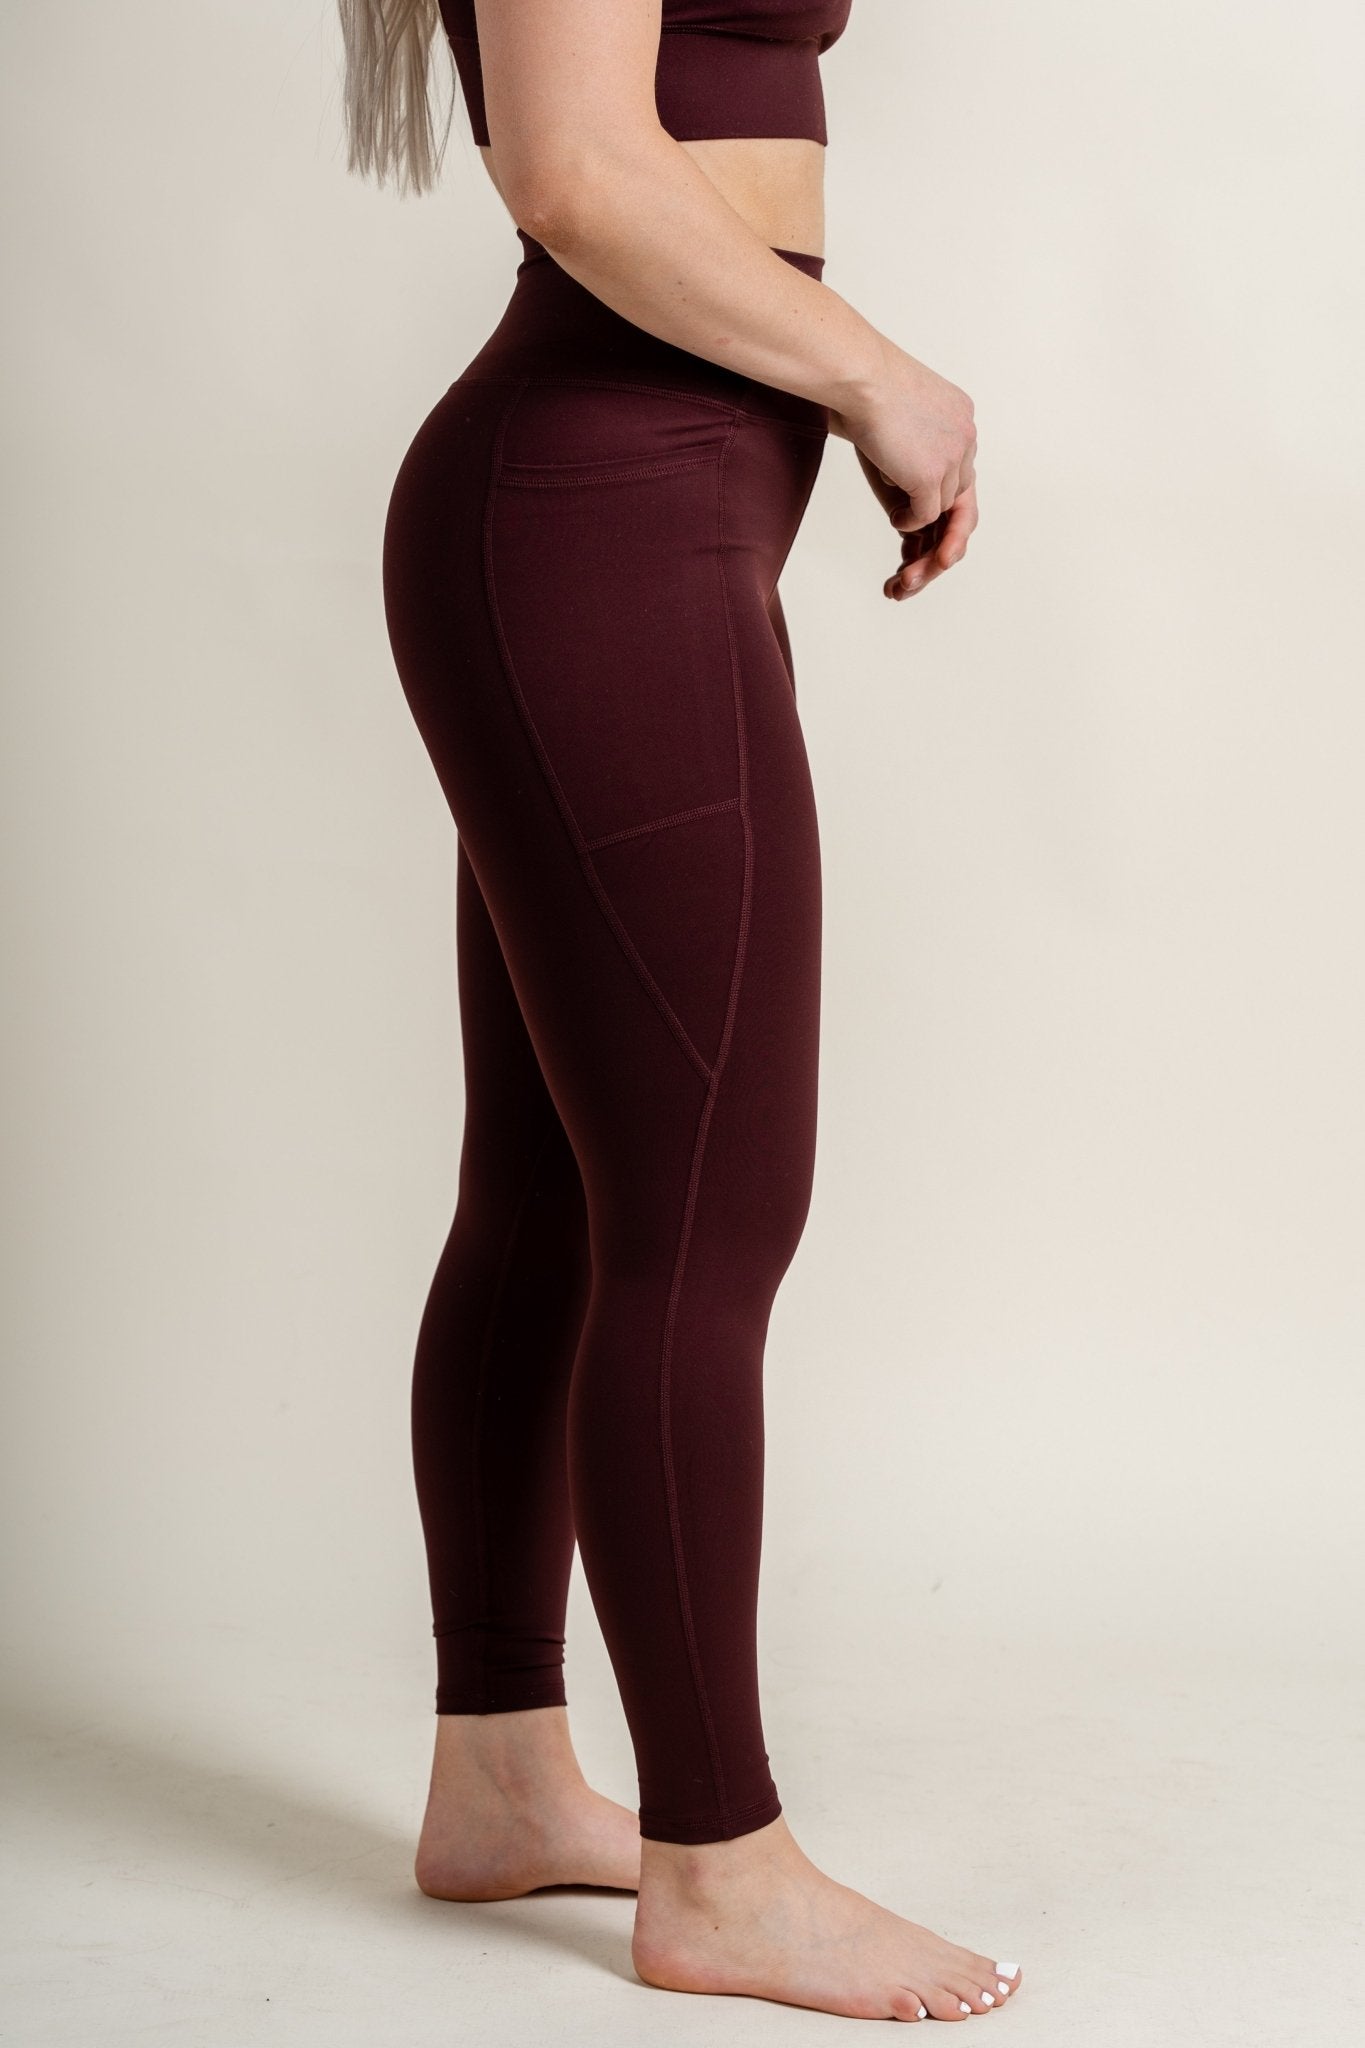 Z Supply all day leggings fig - Z Supply leggings - Z Supply Apparel at Lush Fashion Lounge Trendy Boutique Oklahoma City